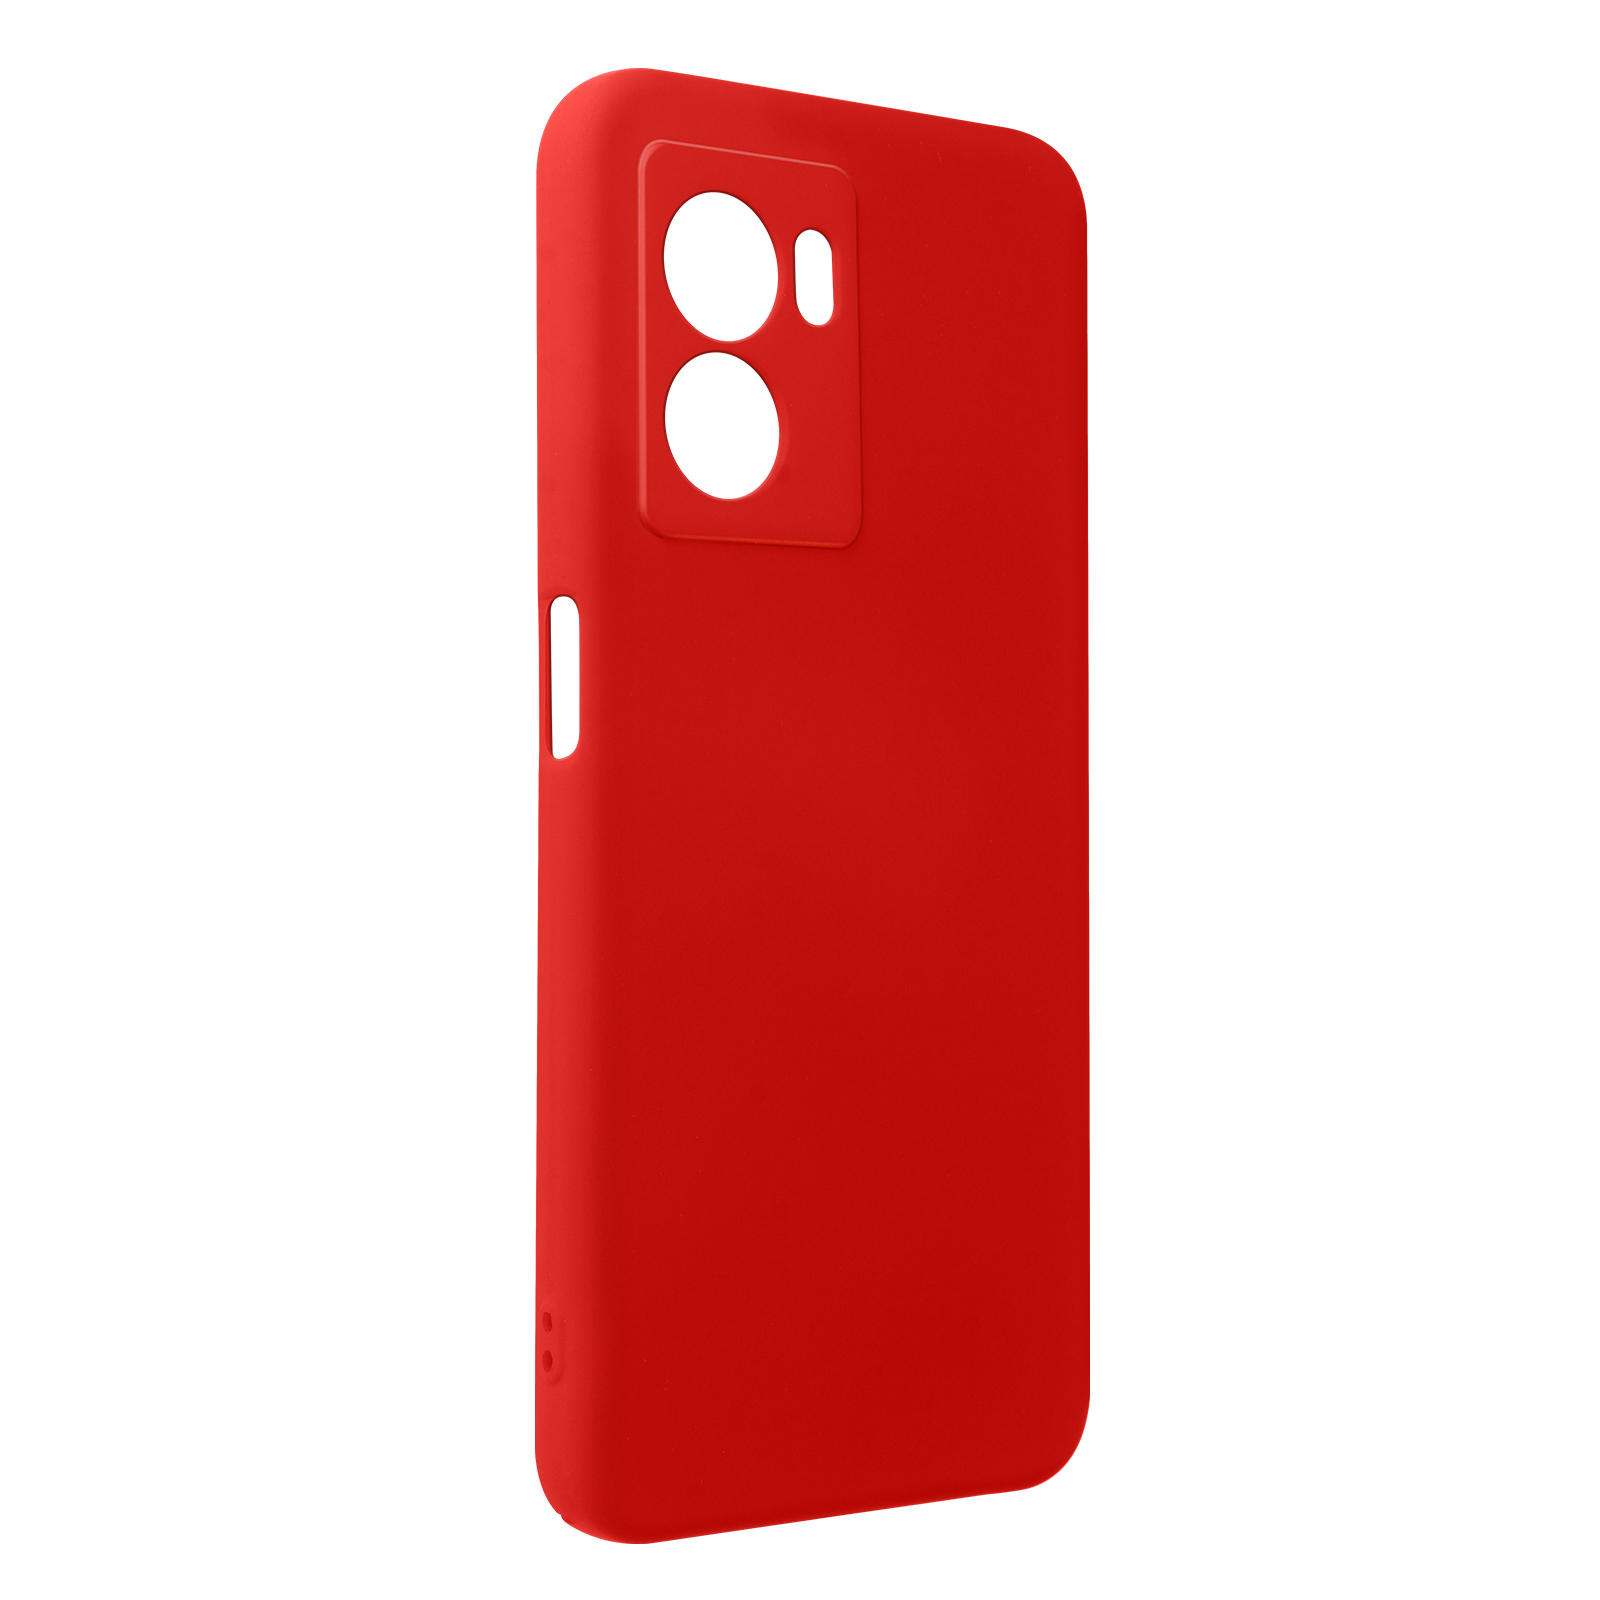 AVIZAR Backcover, Rot Oppo, Oppo Series, Soft A57, Touch